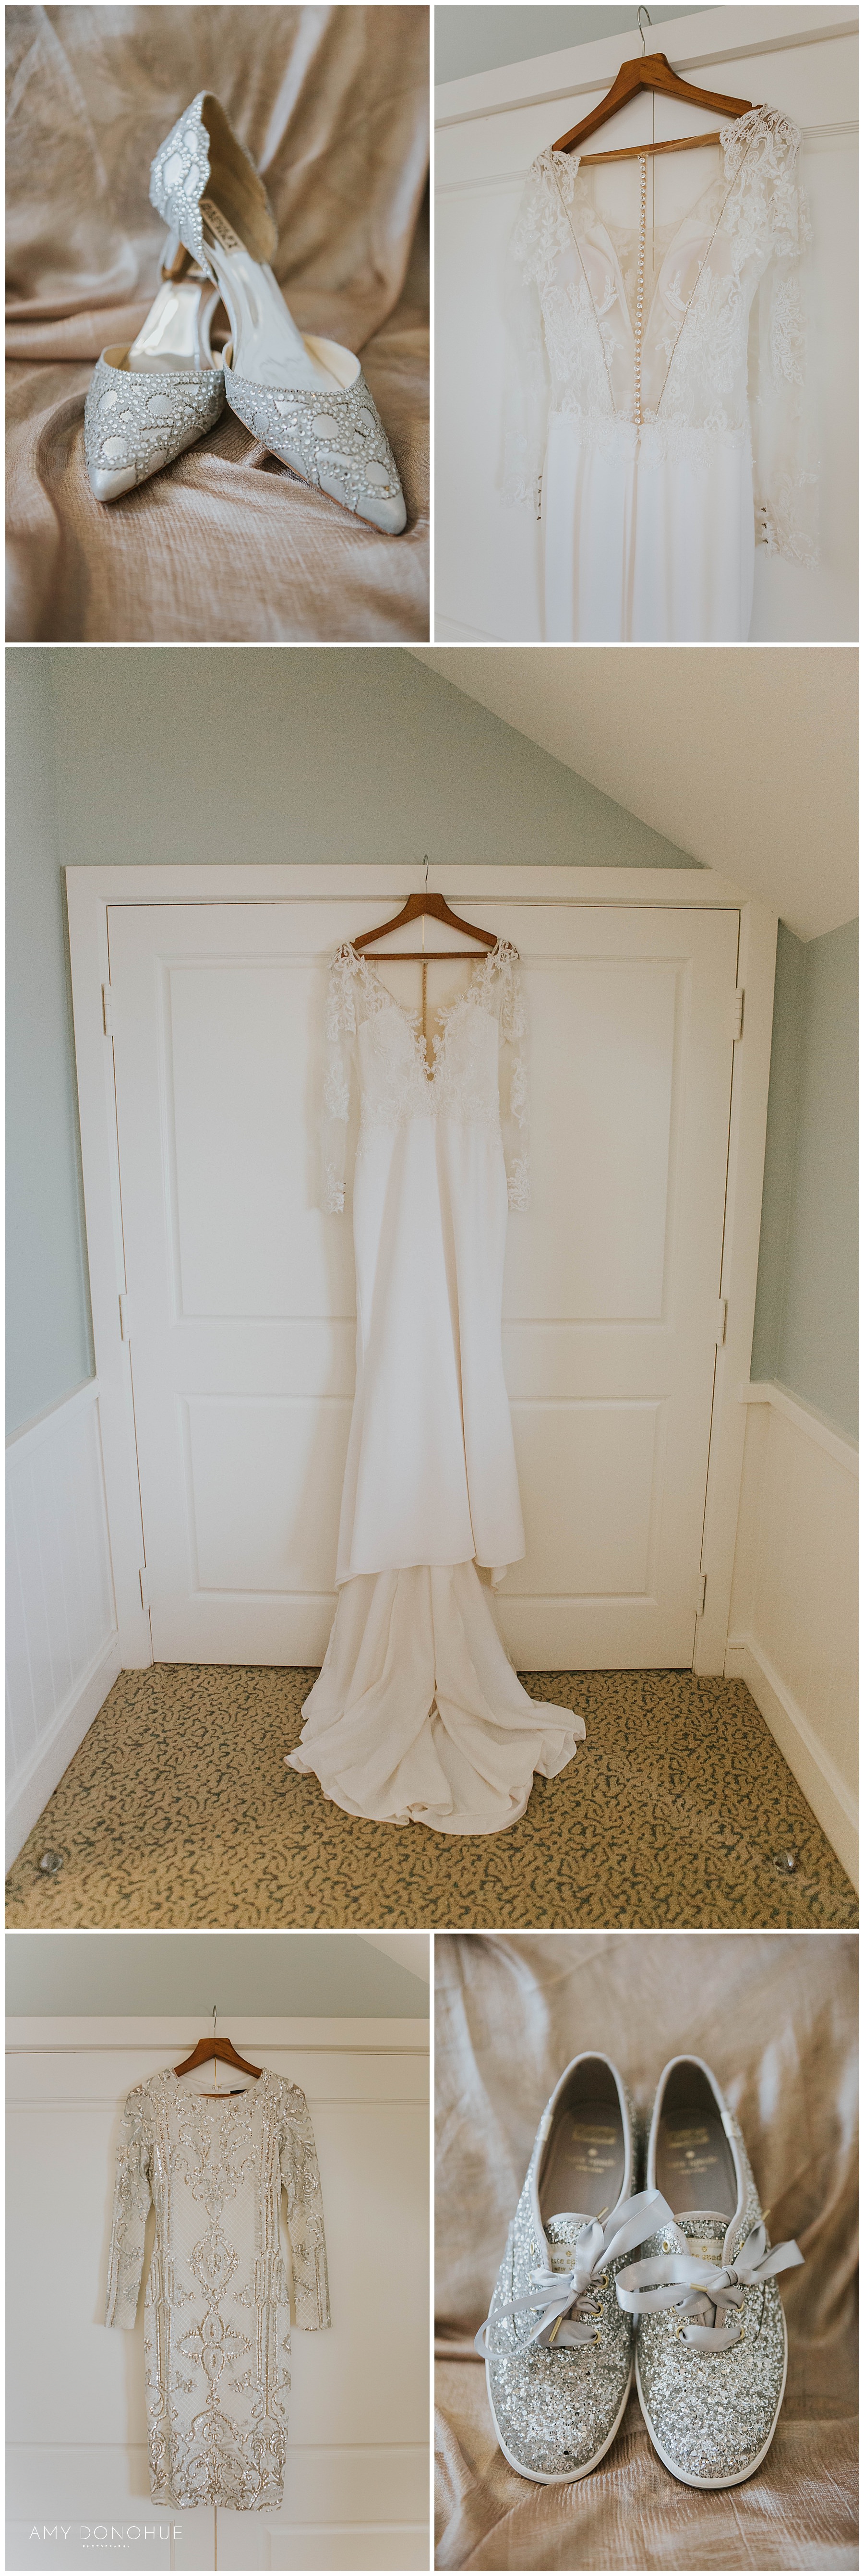 Bridal Dress and Shoes by Badgley Mischka | Woodstock Inn & Resort | VT Wedding Photographer | © Amy Donohue Photography